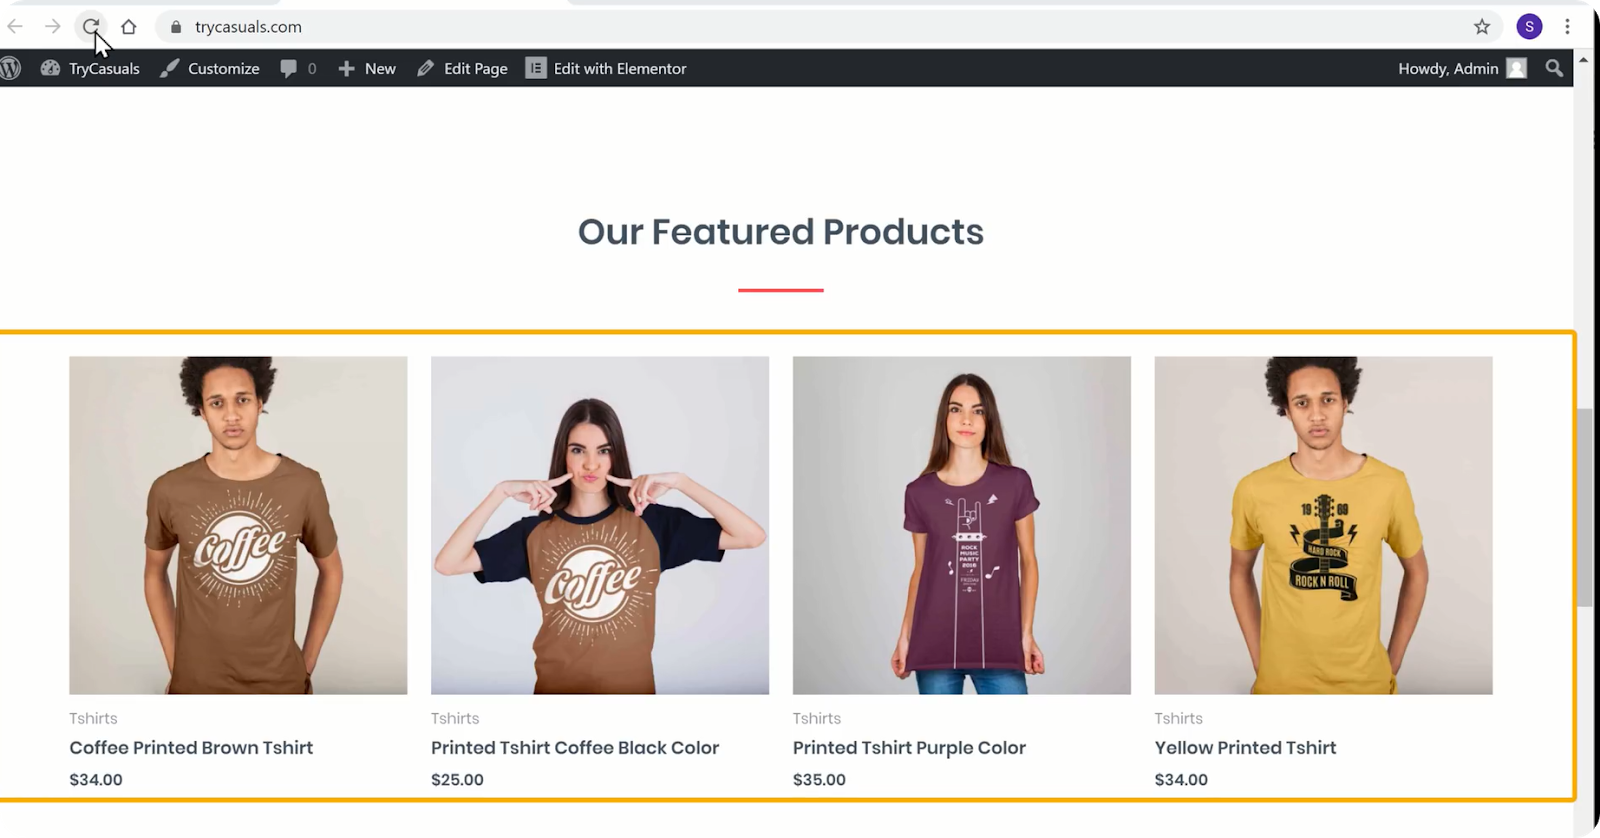 Featured products section